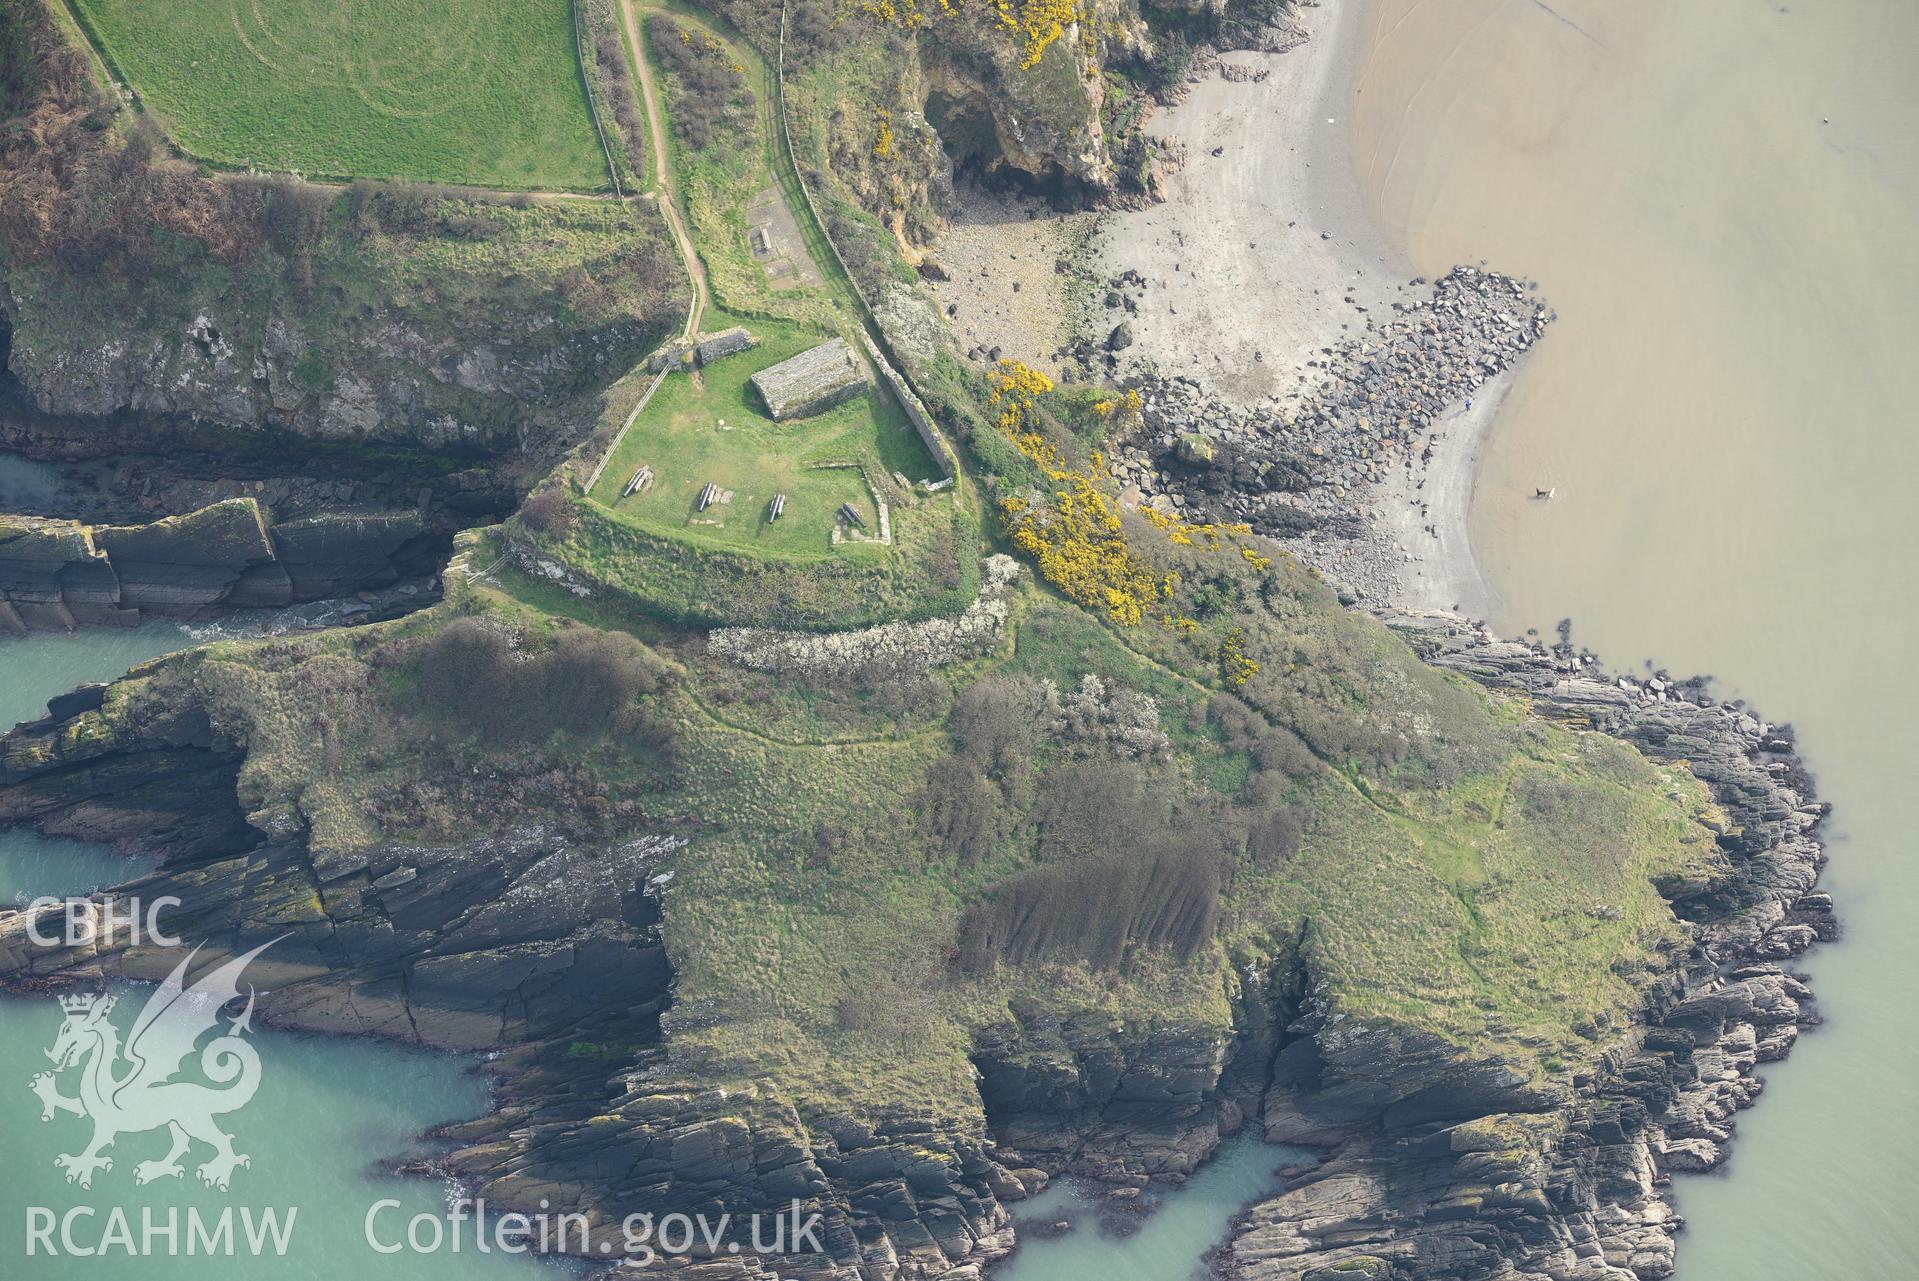 Aerial photography of Fishguard Fort taken on 27th March 2017. Baseline aerial reconnaissance survey for the CHERISH Project. ? Crown: CHERISH PROJECT 2017. Produced with EU funds through the Ireland Wales Co-operation Programme 2014-2020. All material made freely available through the Open Government Licence.